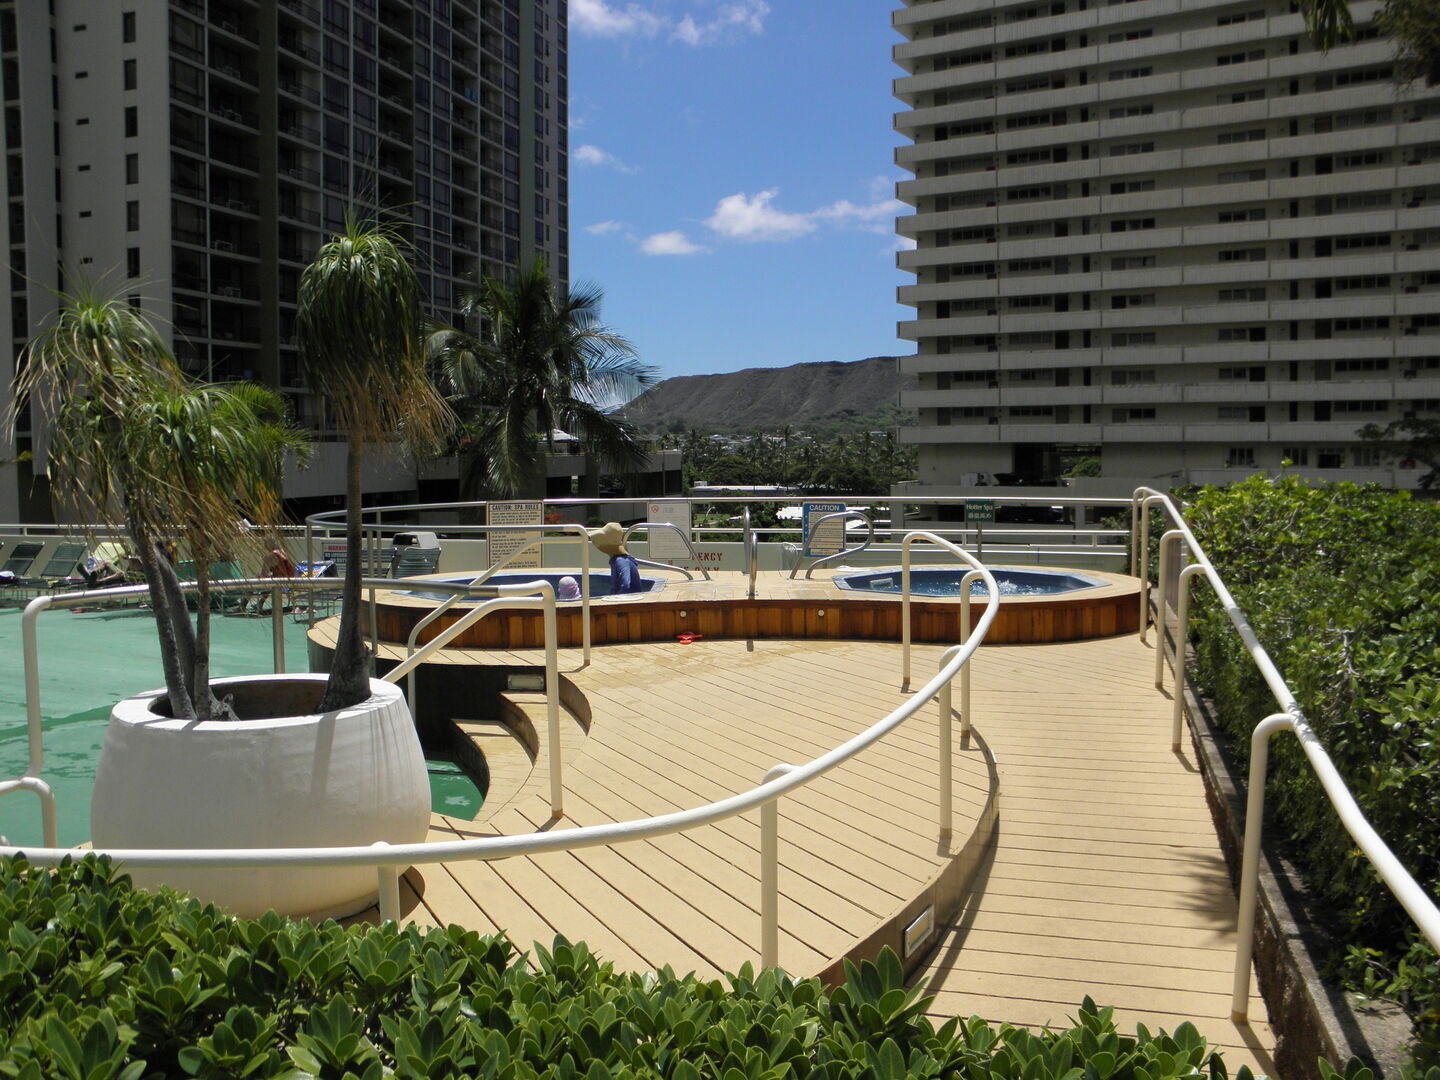 Two Hot tubs  6th floor recreation deck